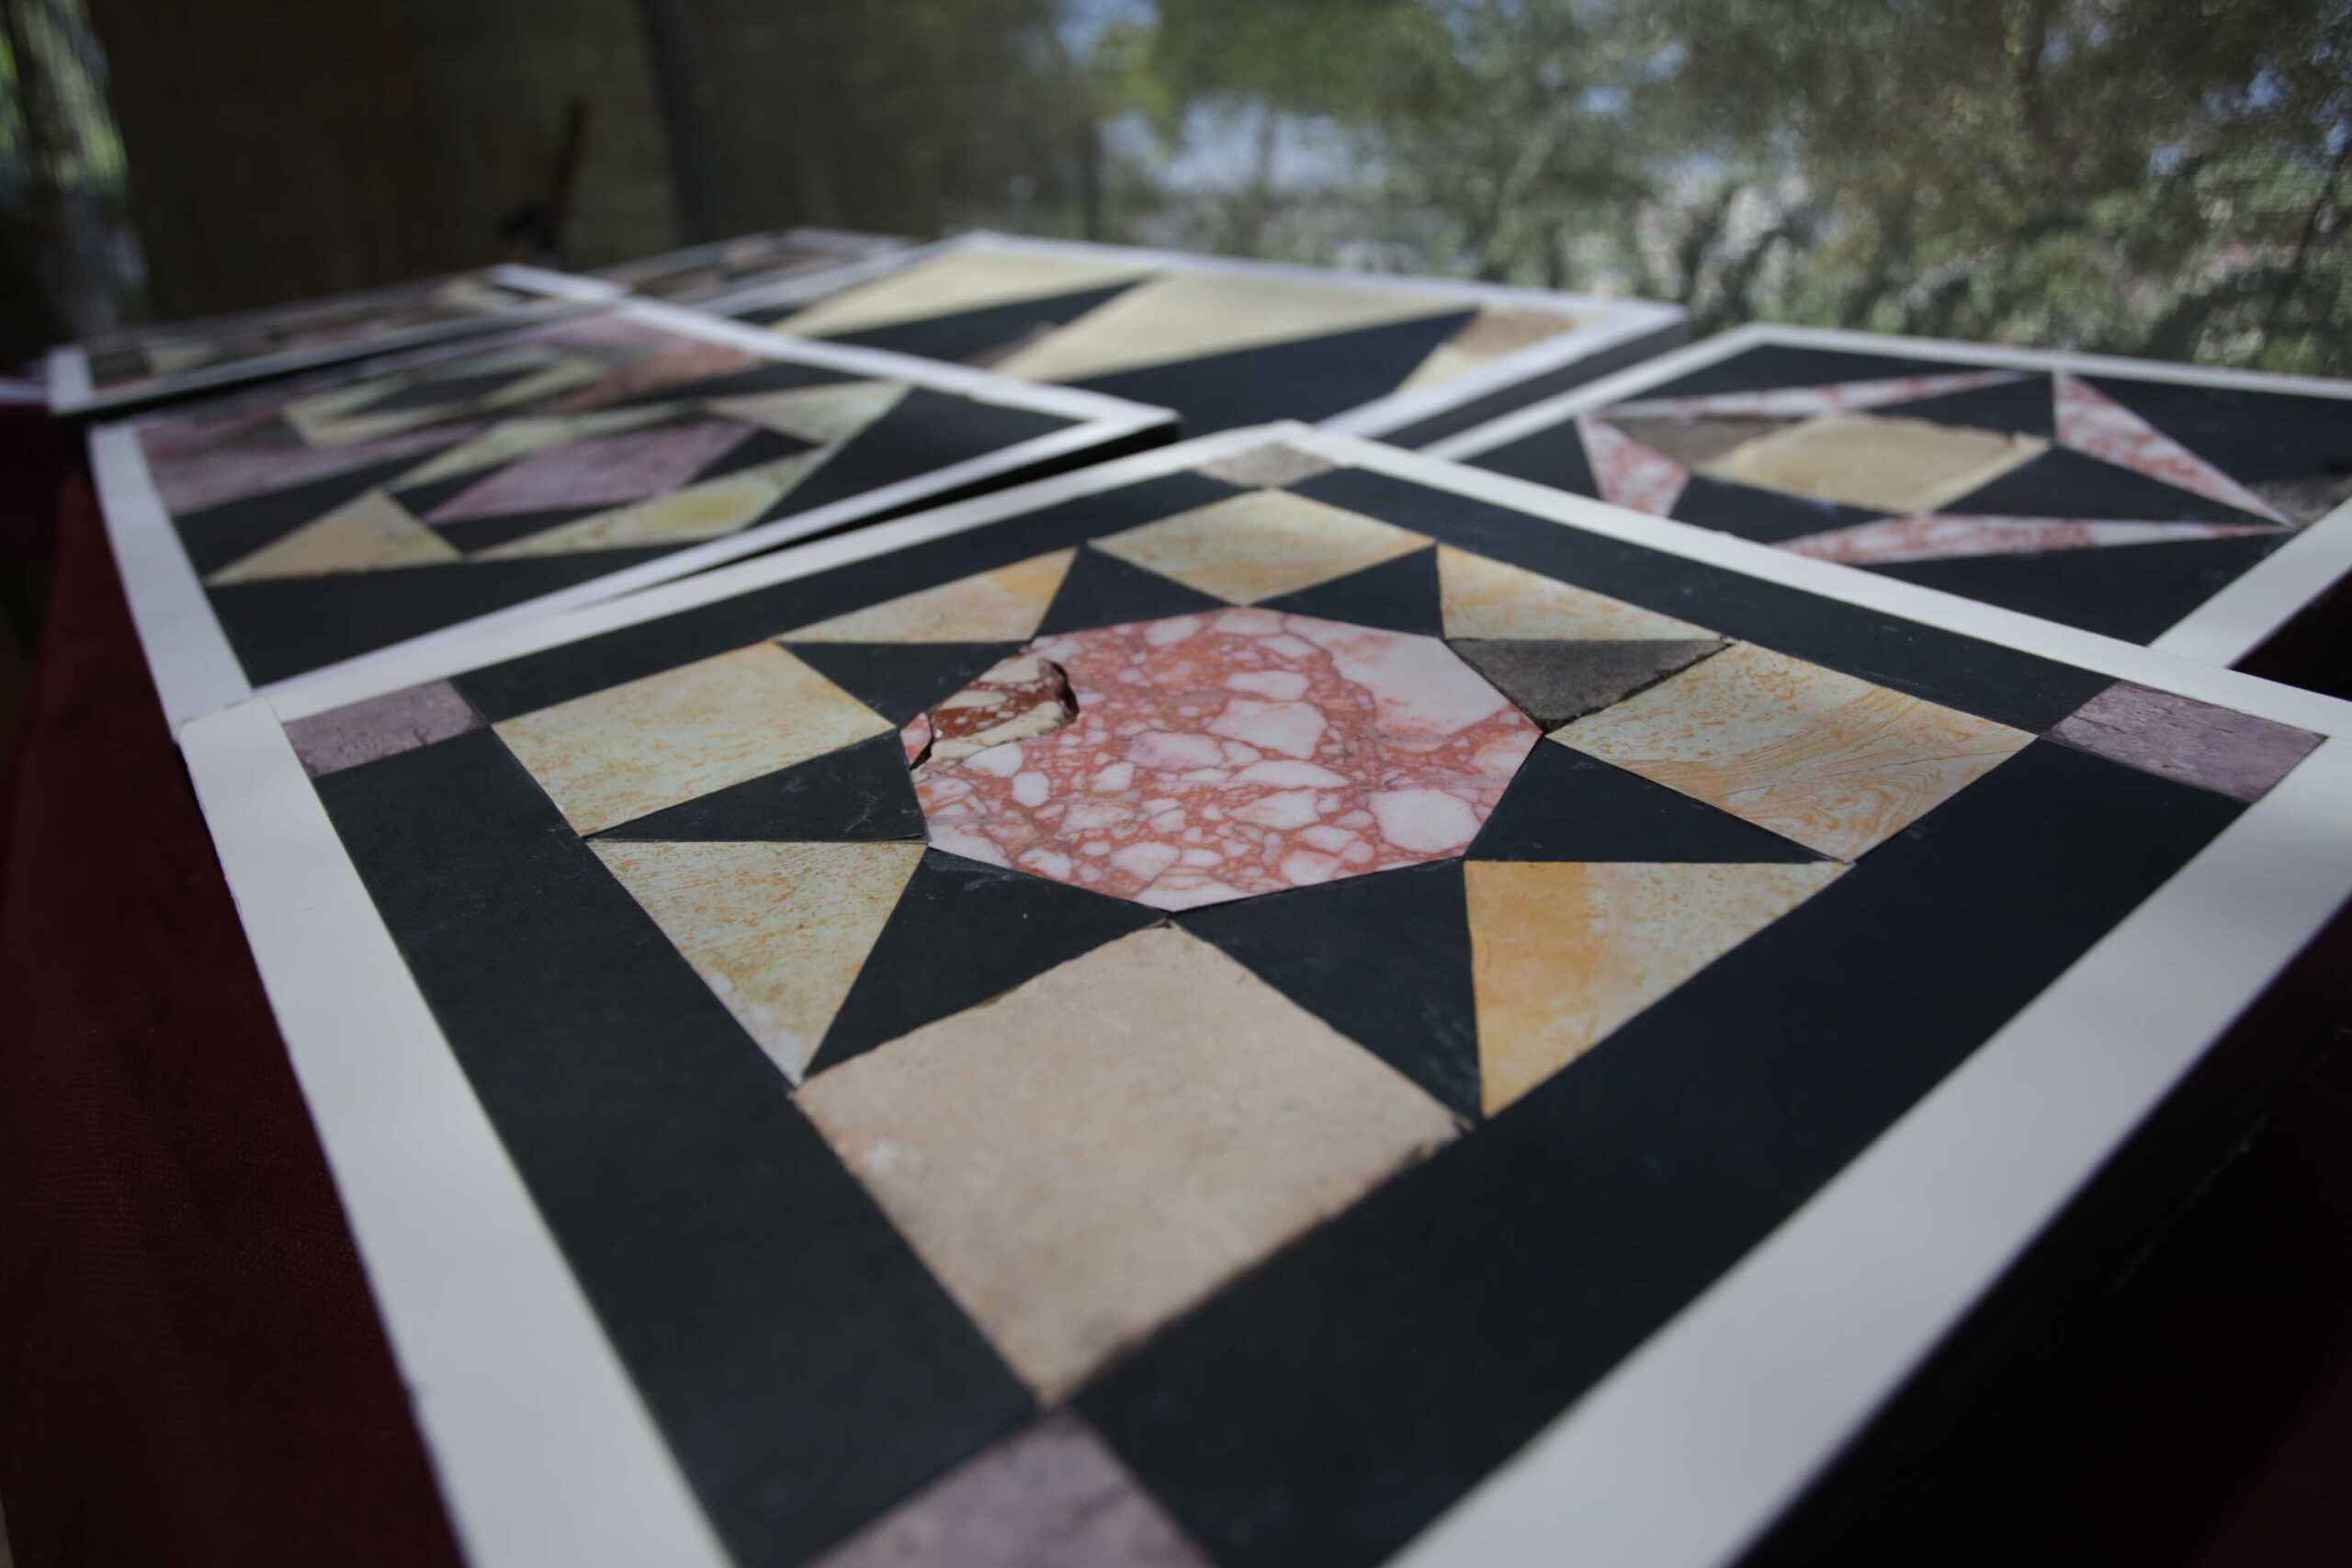 Restoration of the floor tiles in the temple. Photo: Menashe Mangan